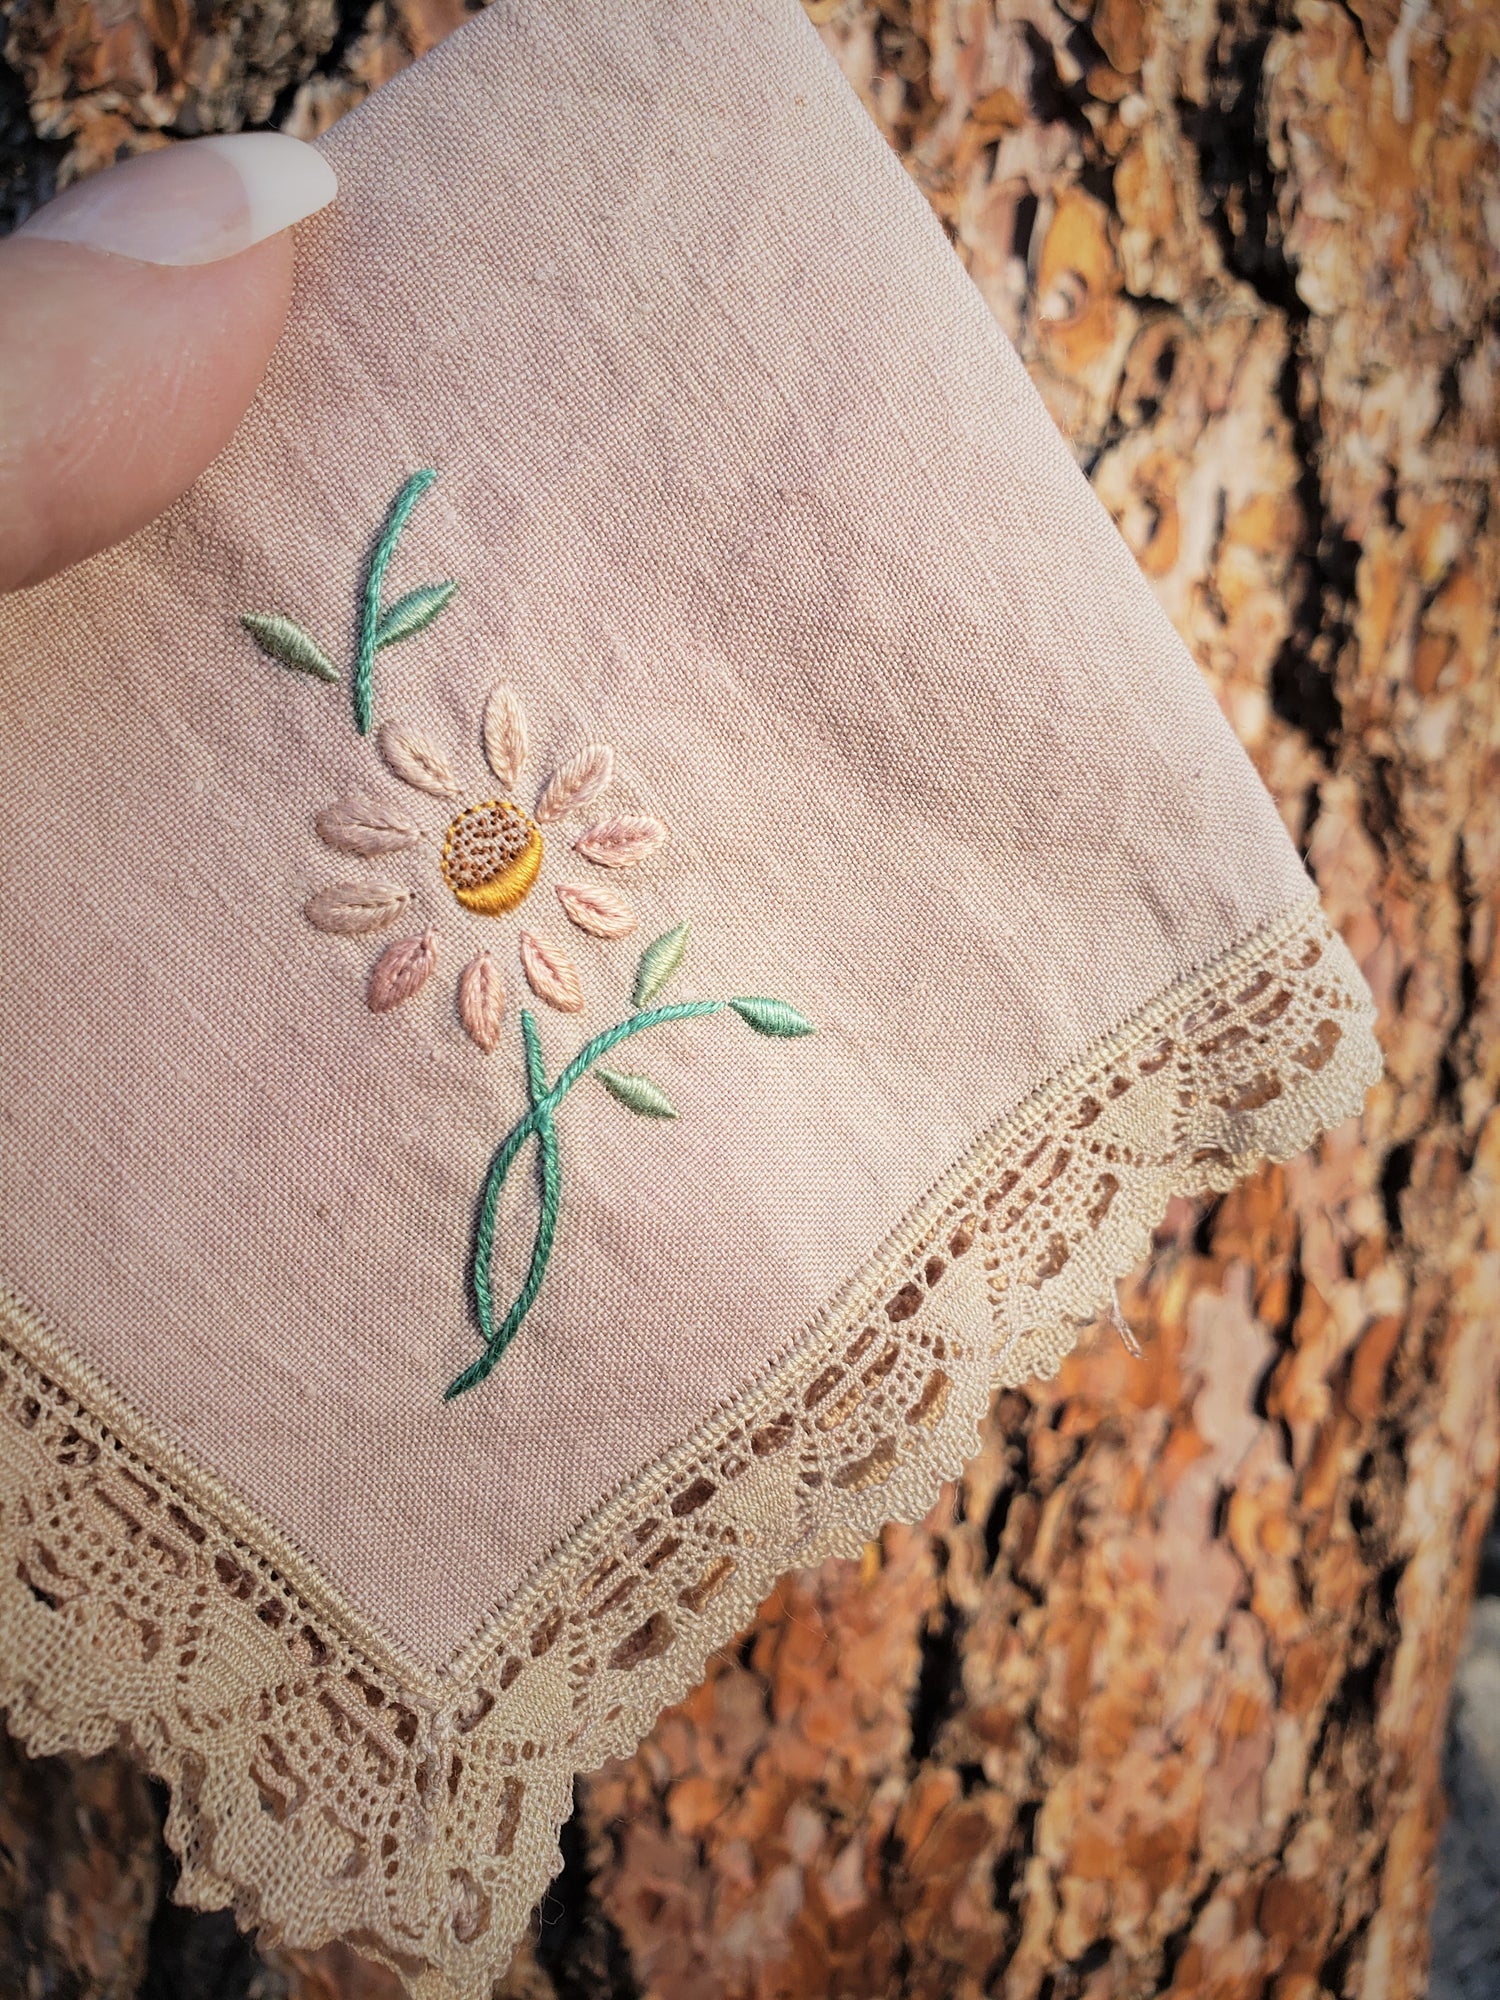 Hand Plant Dyed Vintage Handkerchief with Embroidered Wildflower